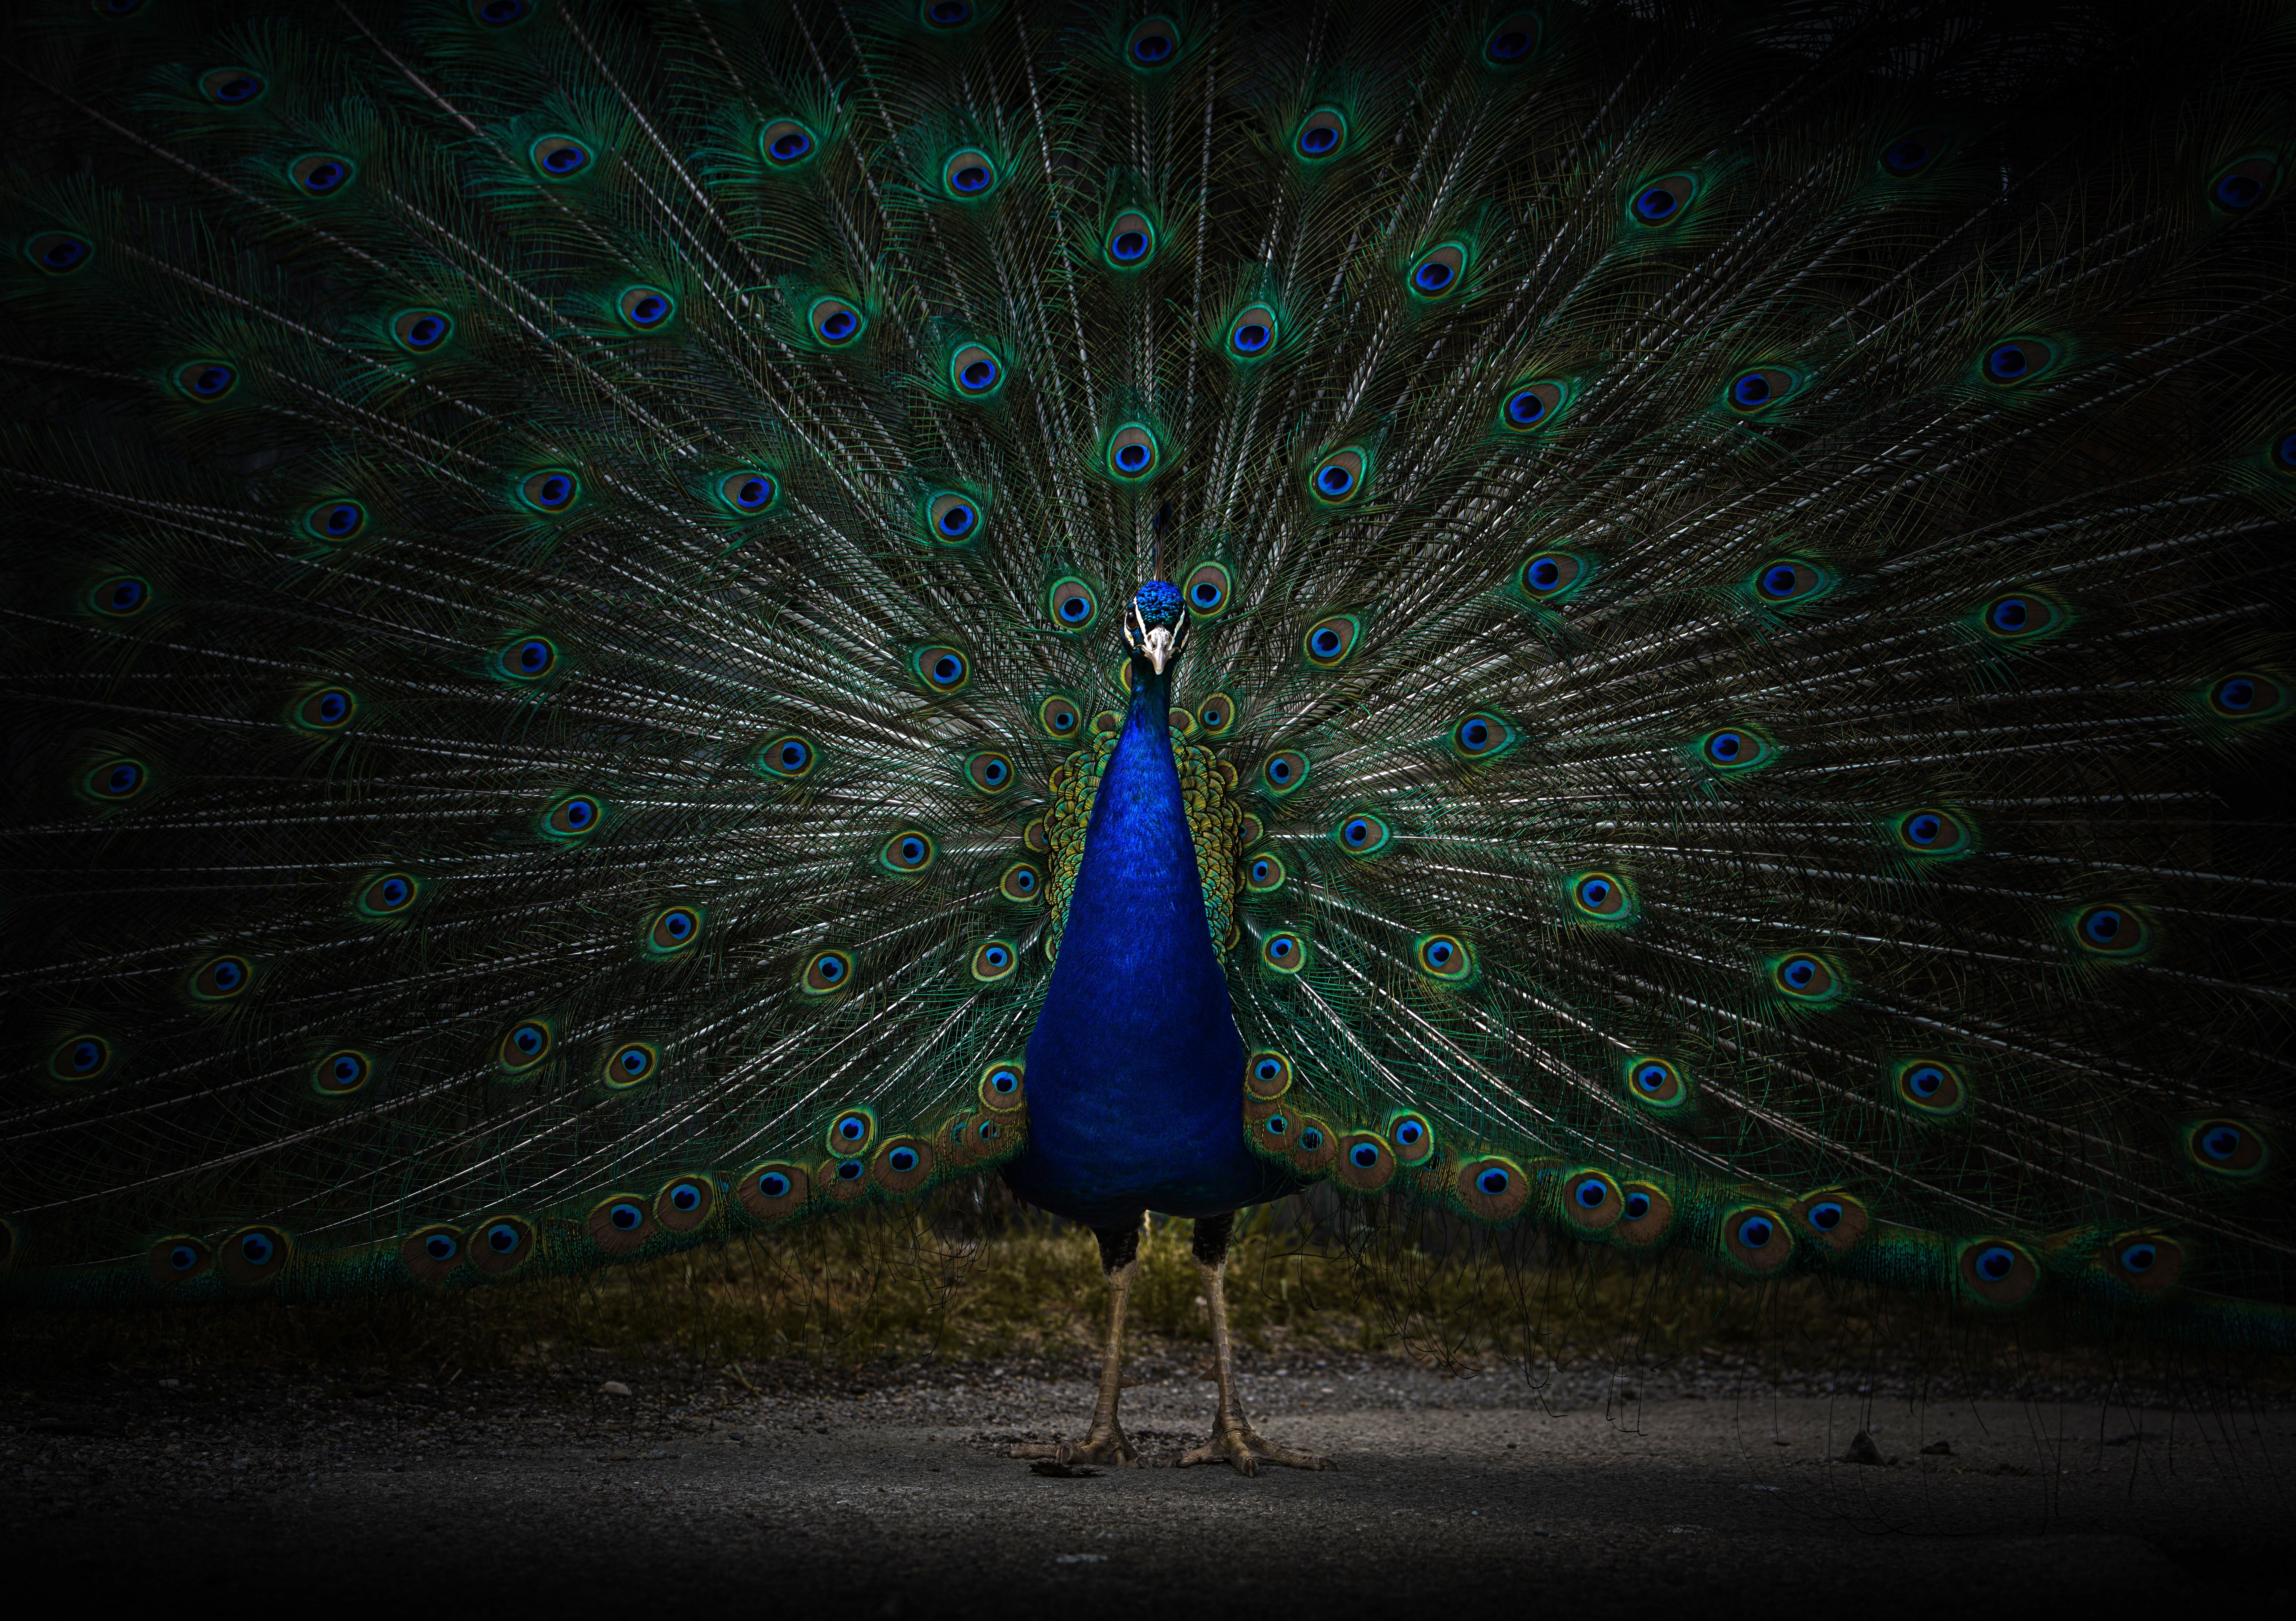 Peacock Wall Paper Wallpapers